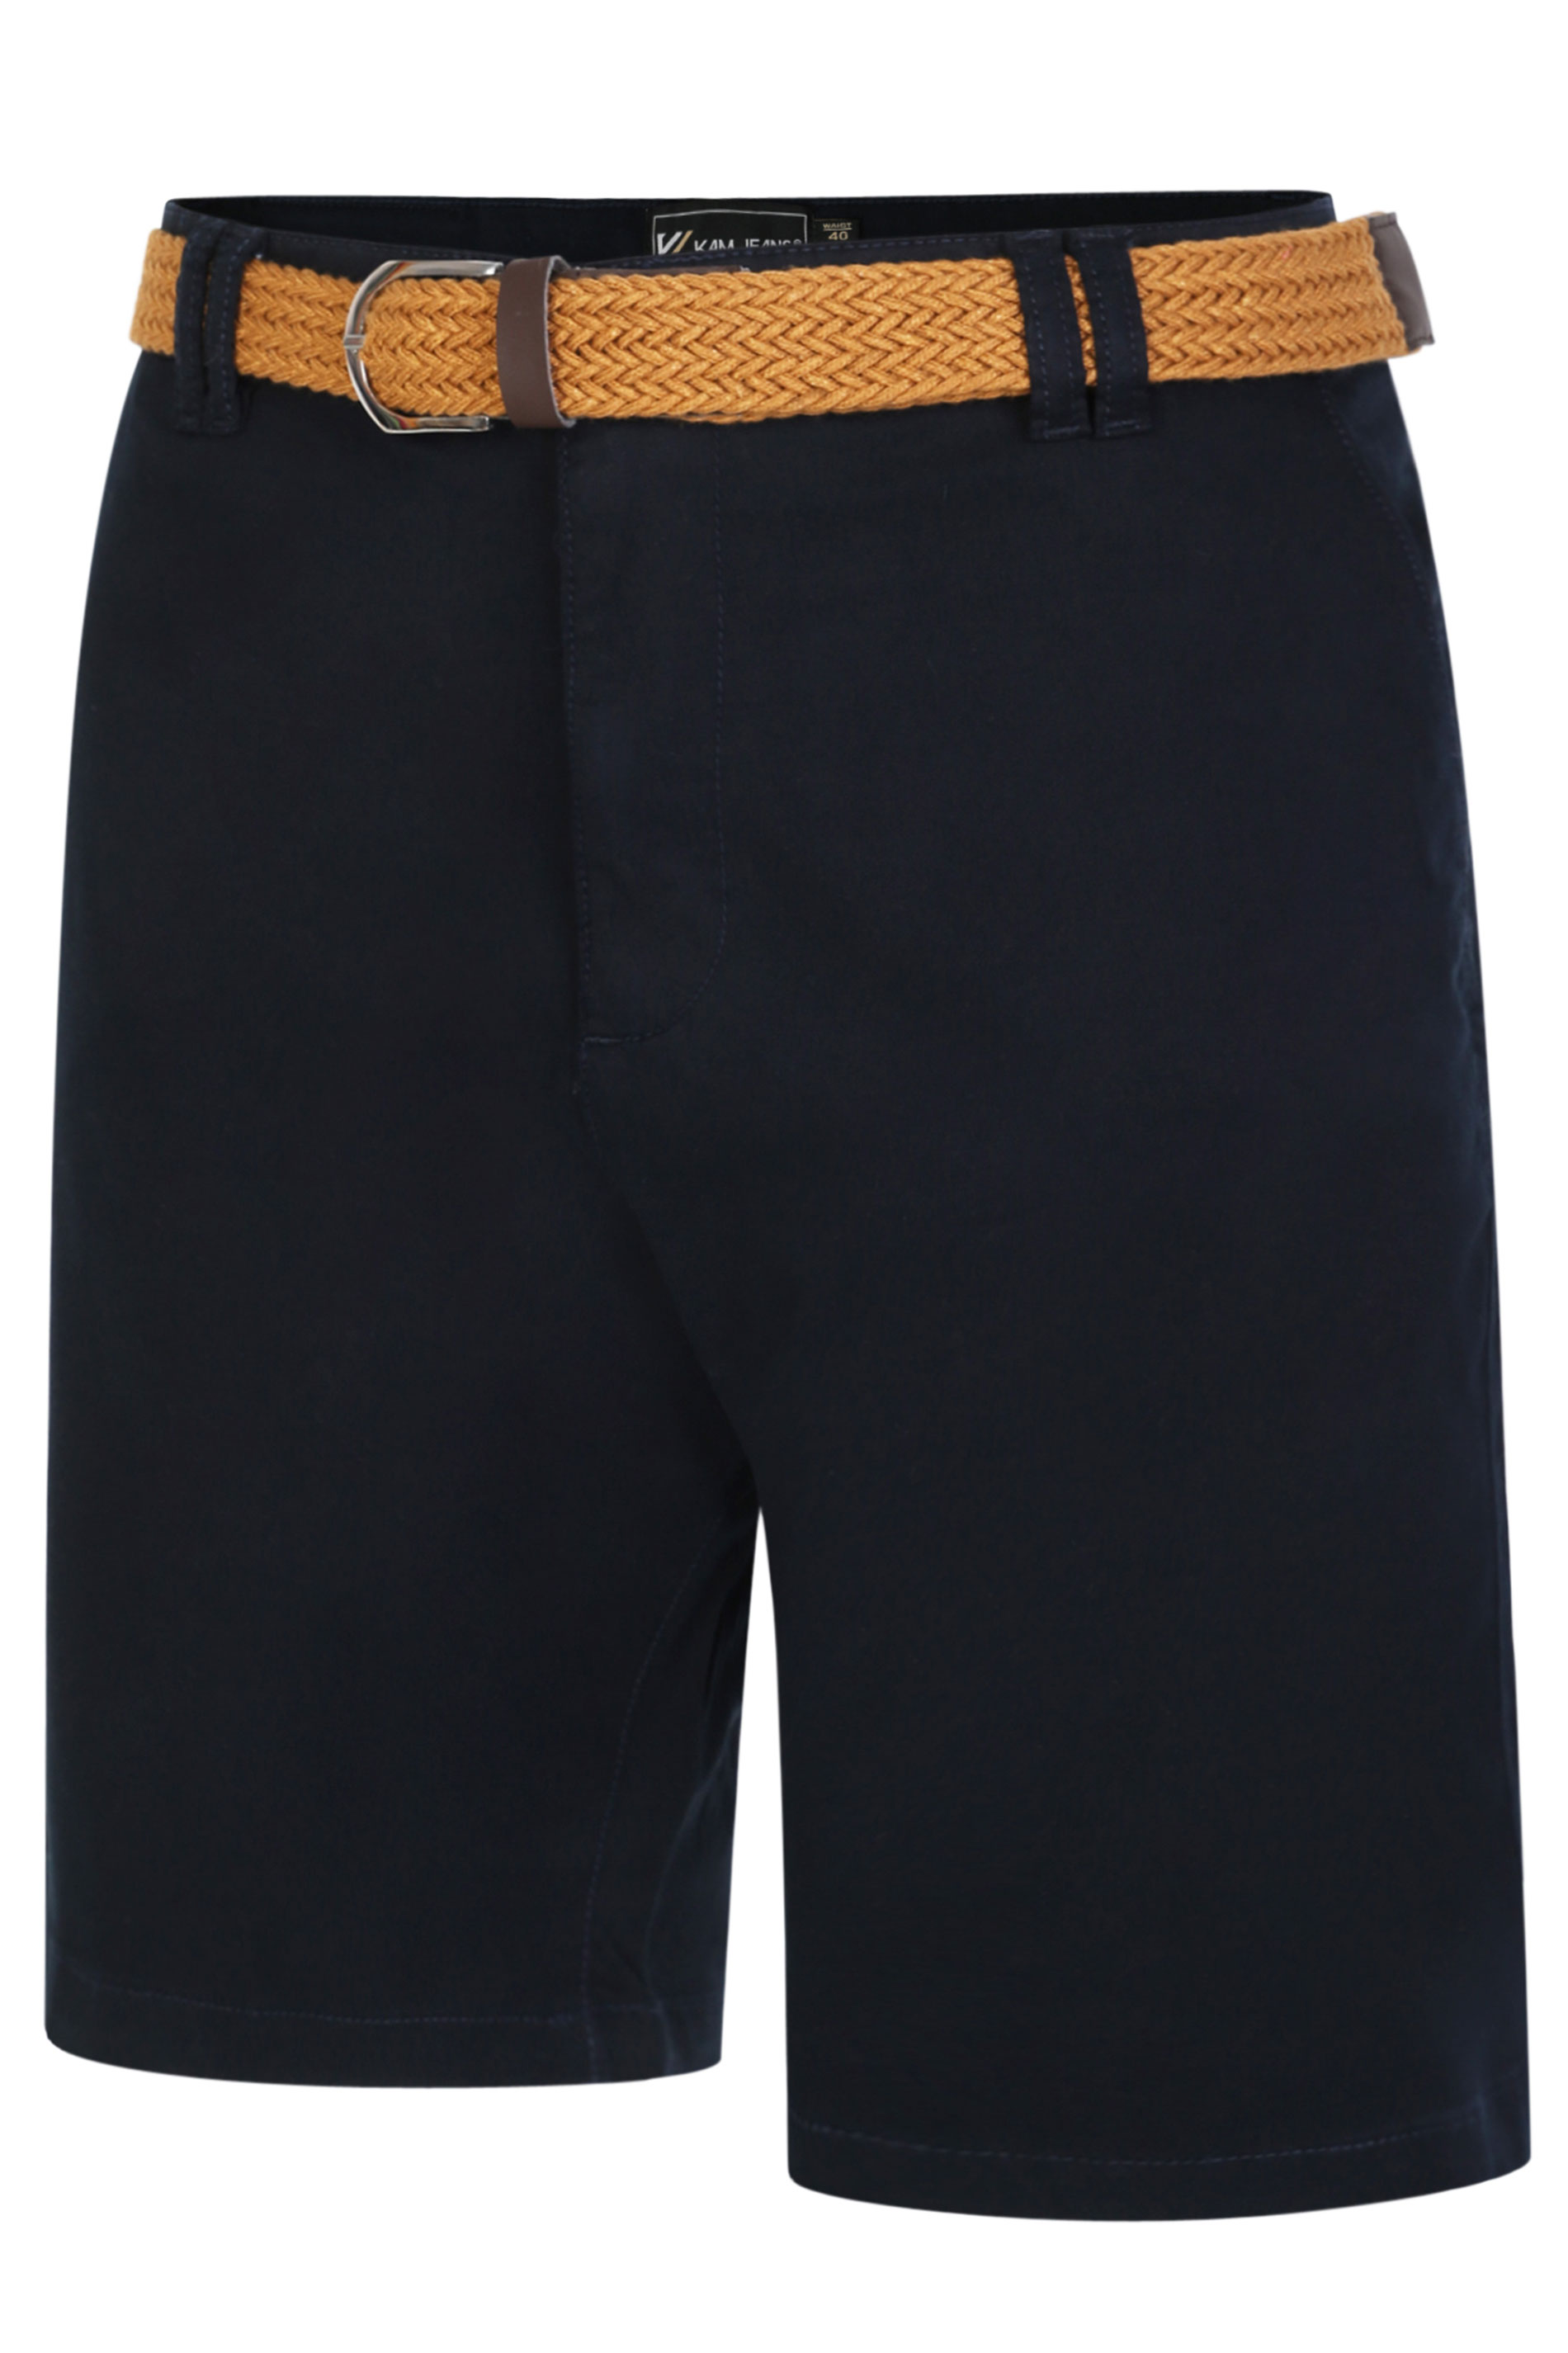 KAM Big & Tall Navy Blue Belted Oxford Shorts 1